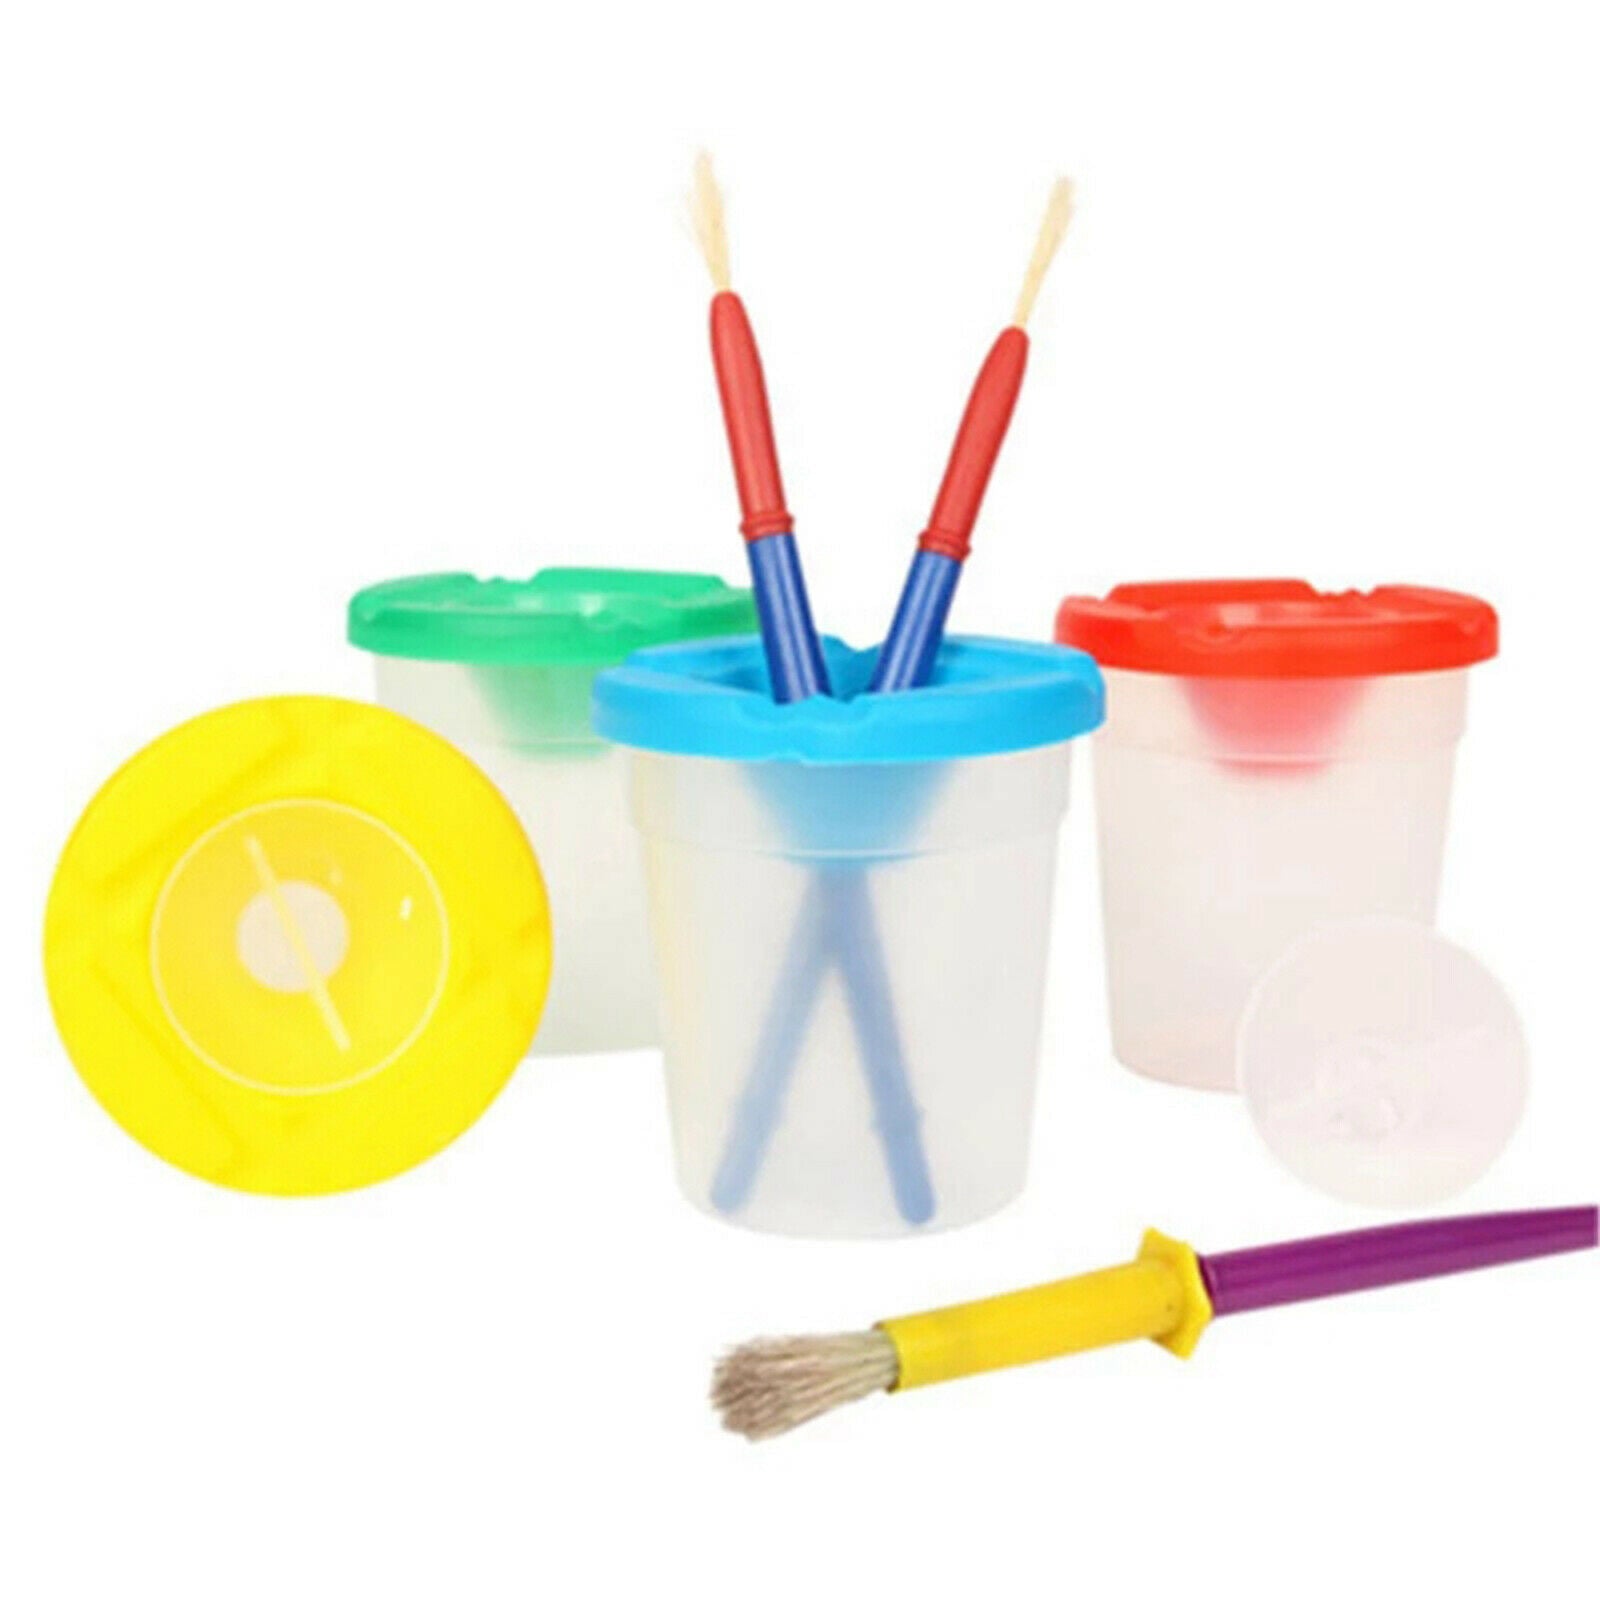 10 Pack No Spill Paint Cups Set with Brushes - Spill Proof Paint Cups with Lids,